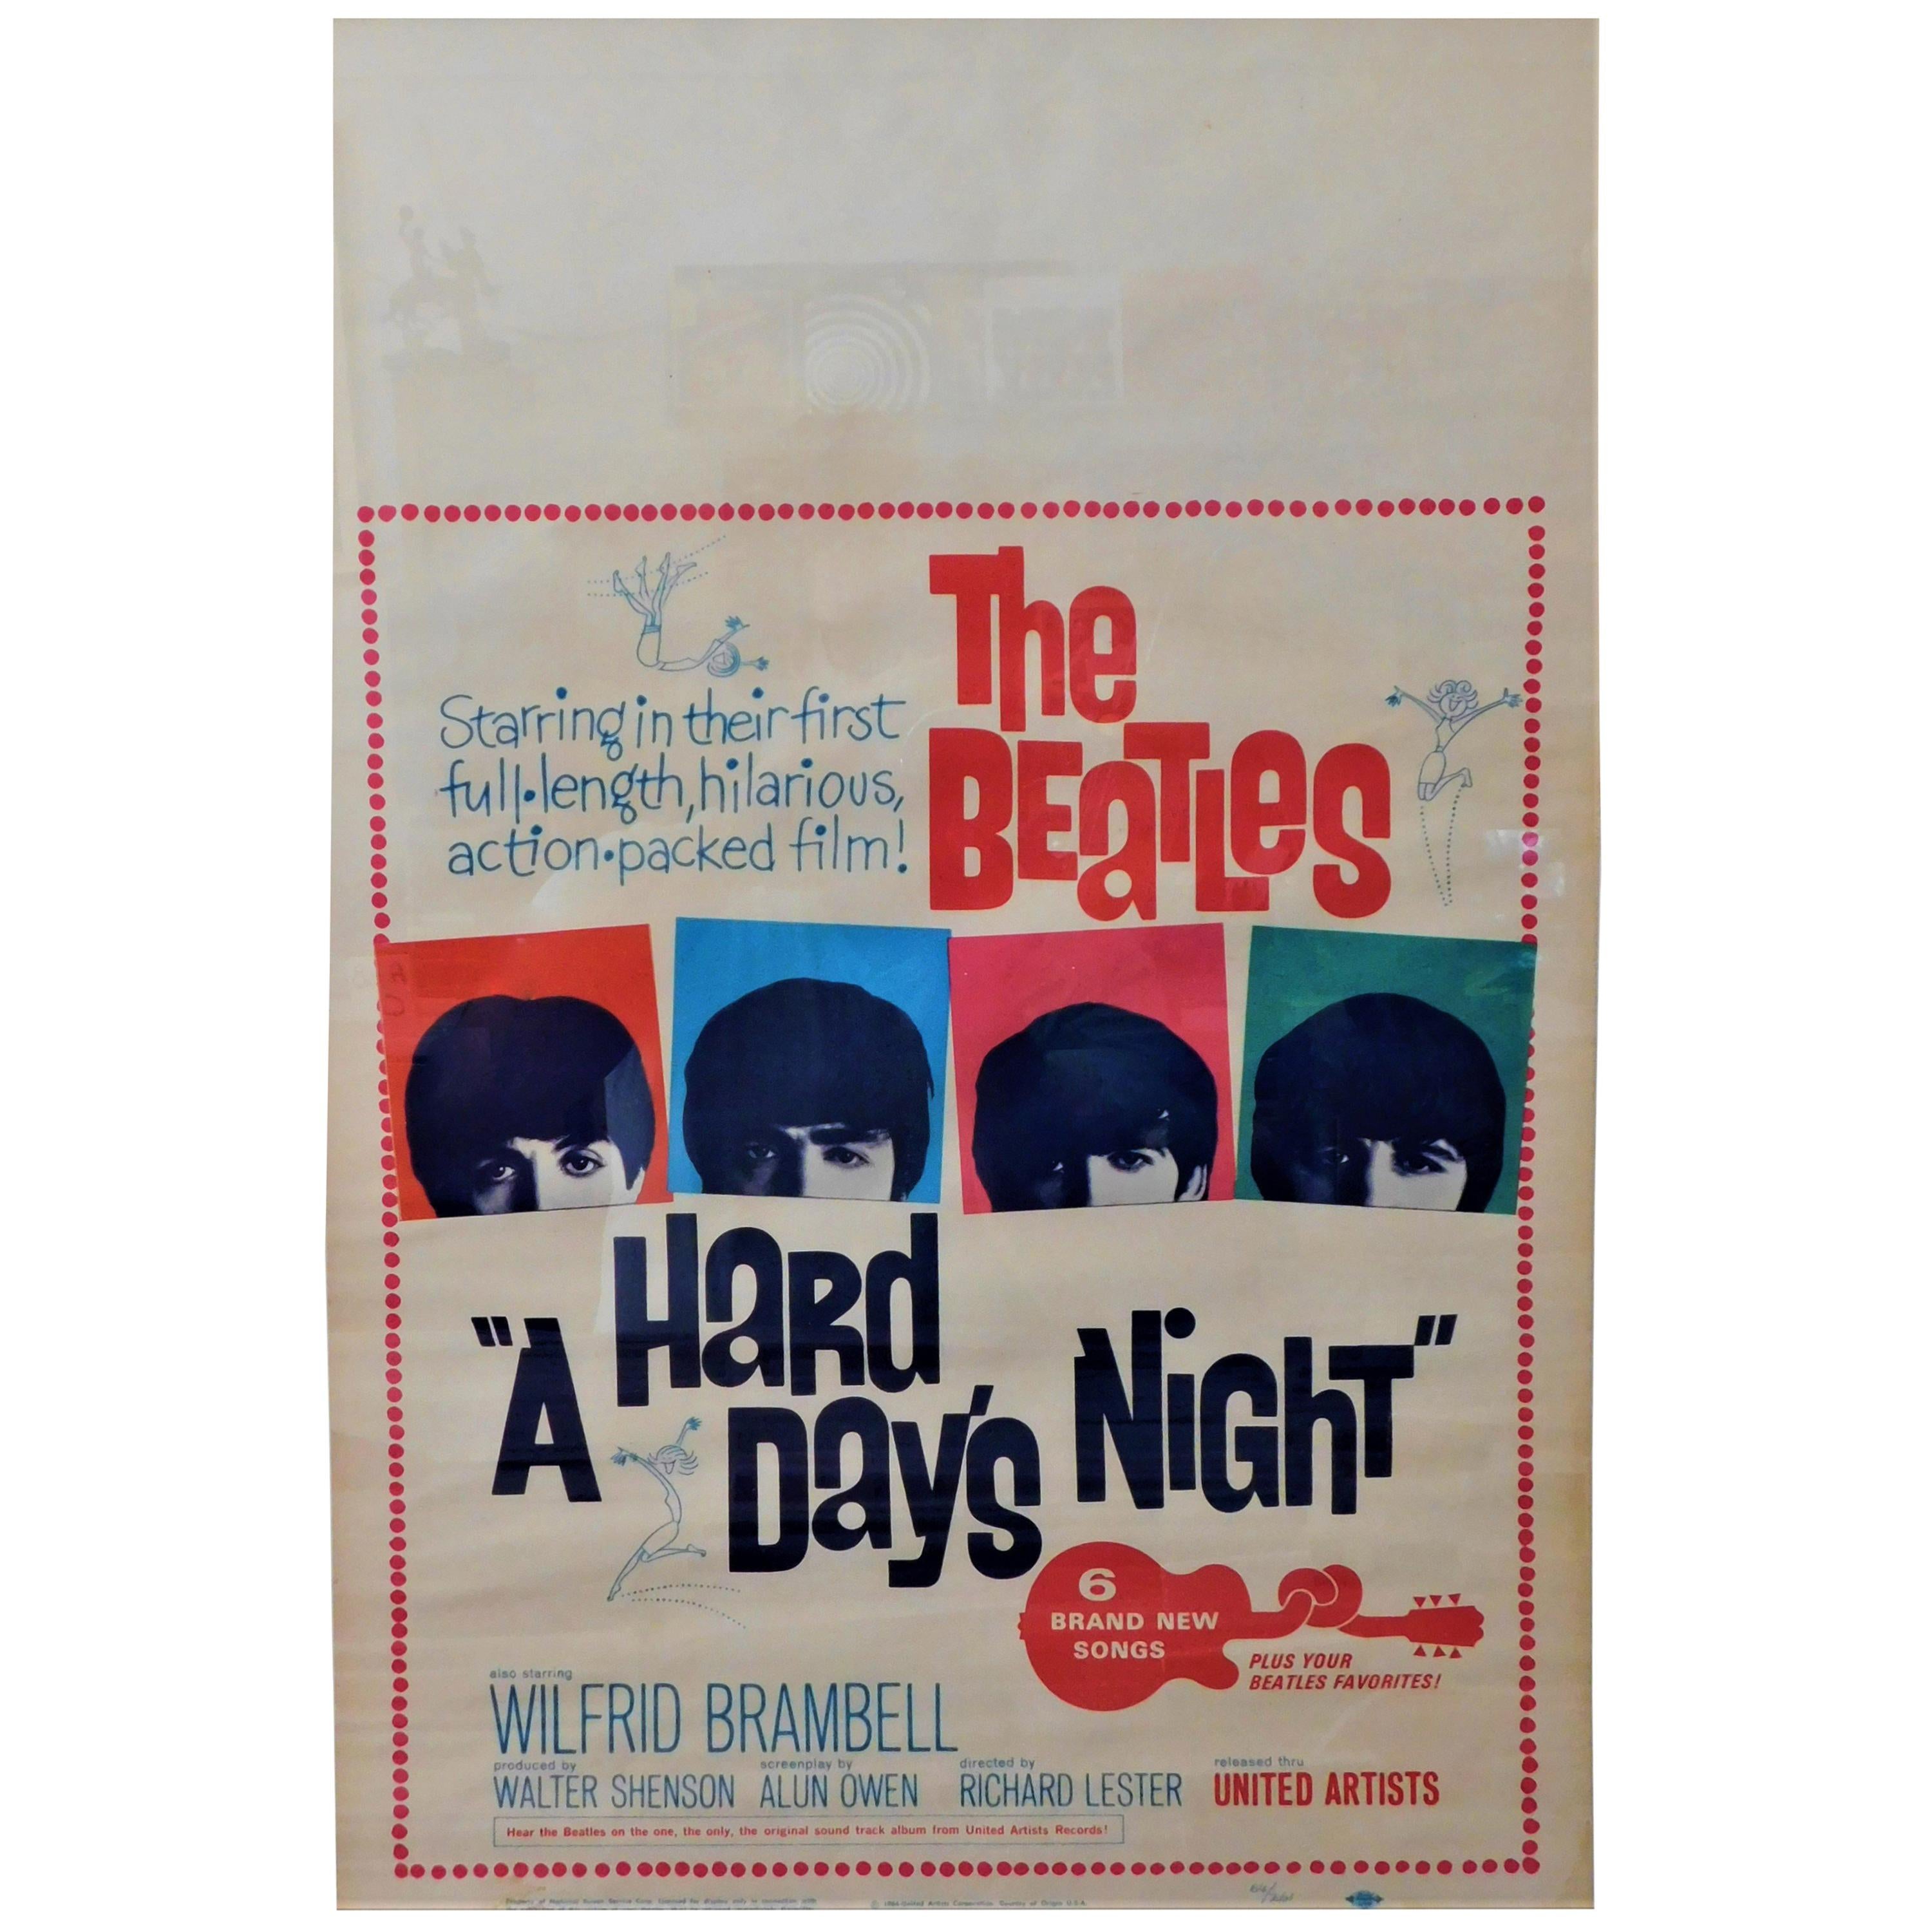 The Beatles Original A Hard Days Night Window Card For Sale At 1stdibs